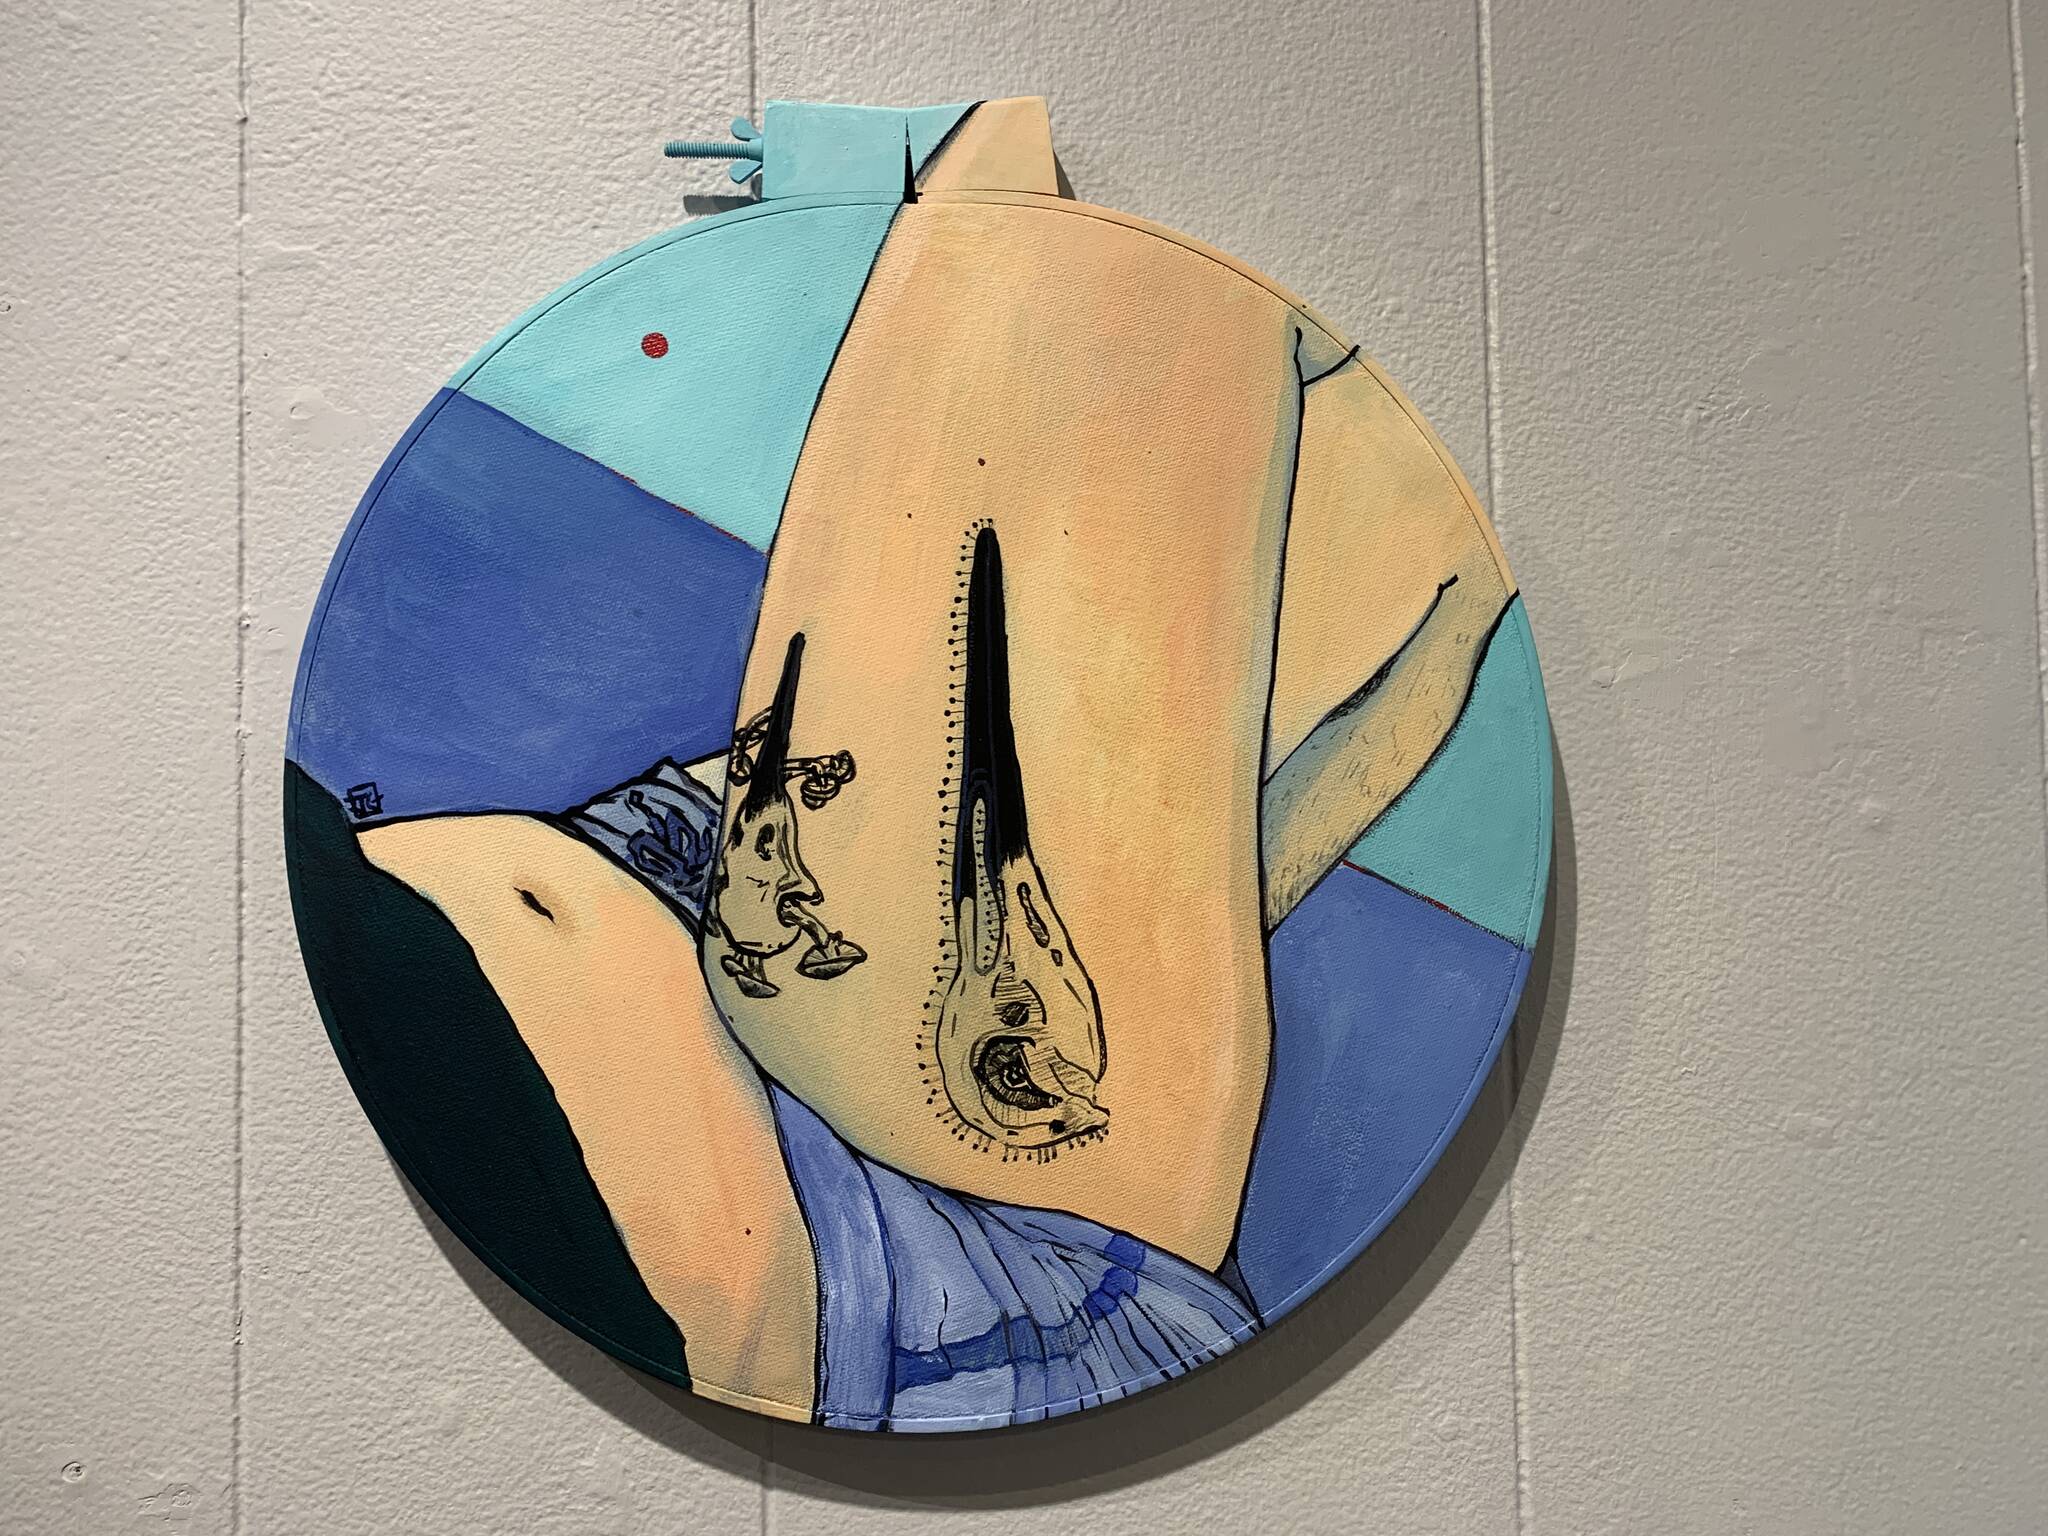 “My Choice,” acrylic on canvas by Jenna Gerrety, is on display at Homer Council on the Arts through March as part of the “Bodily Autonomy” exhibit co-sponsored by Kachemak Bay Family Planning Clinic. (Photo by Christina Whiting/Homer News)